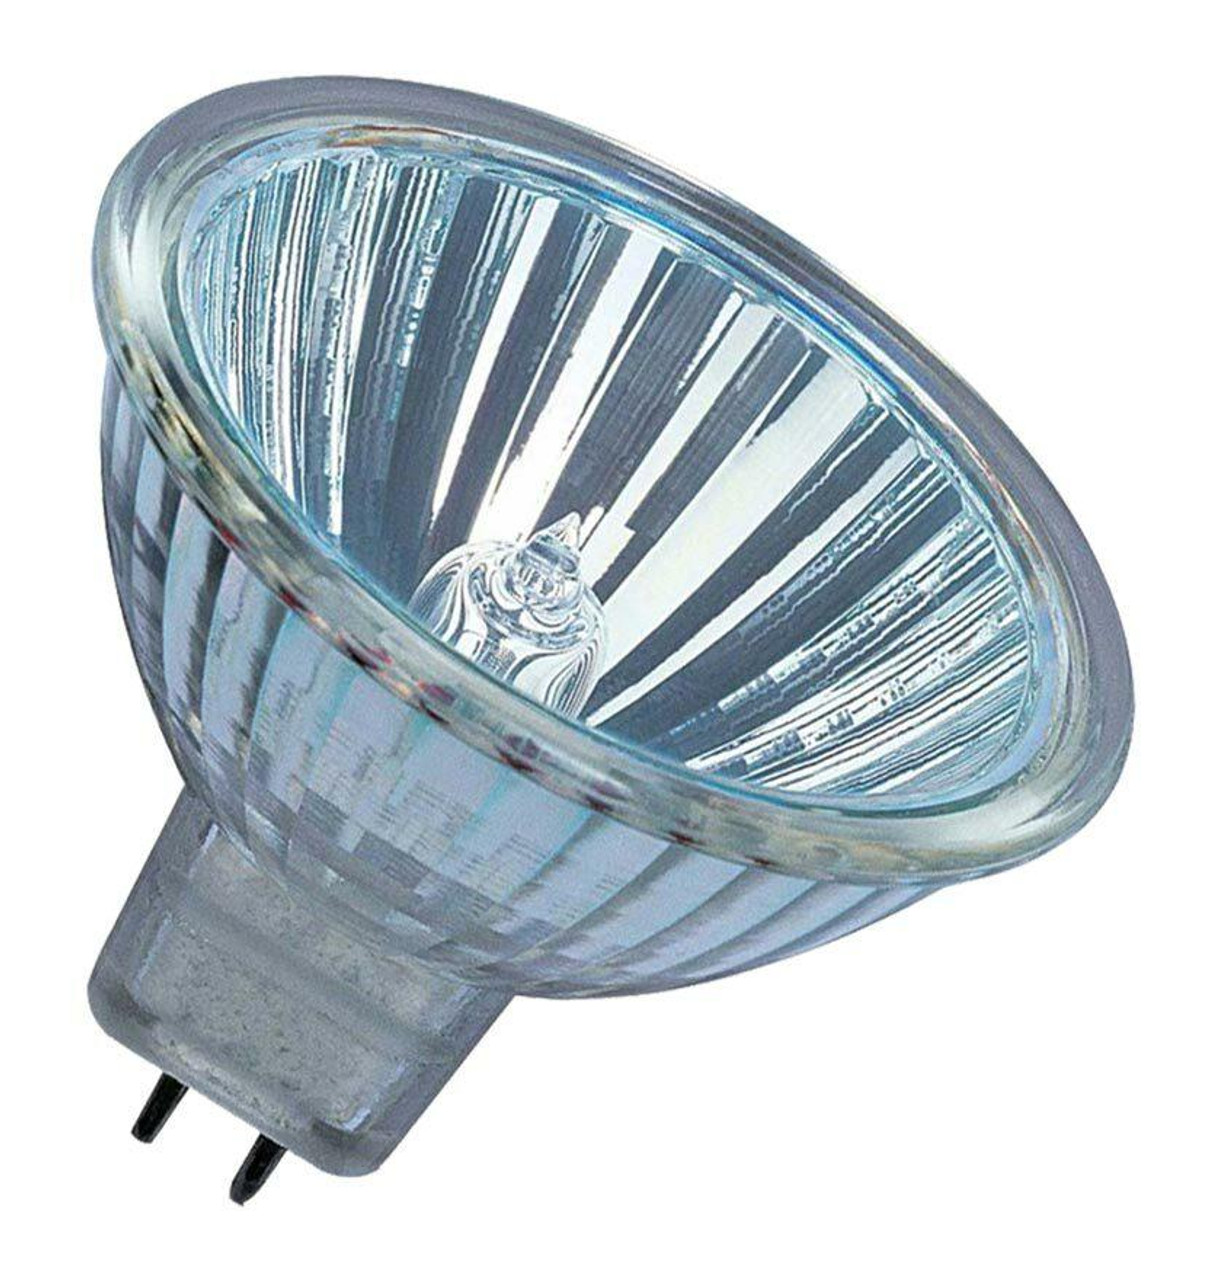 Halogen 50w Luxembourg, SAVE 44% - lutheranems.com